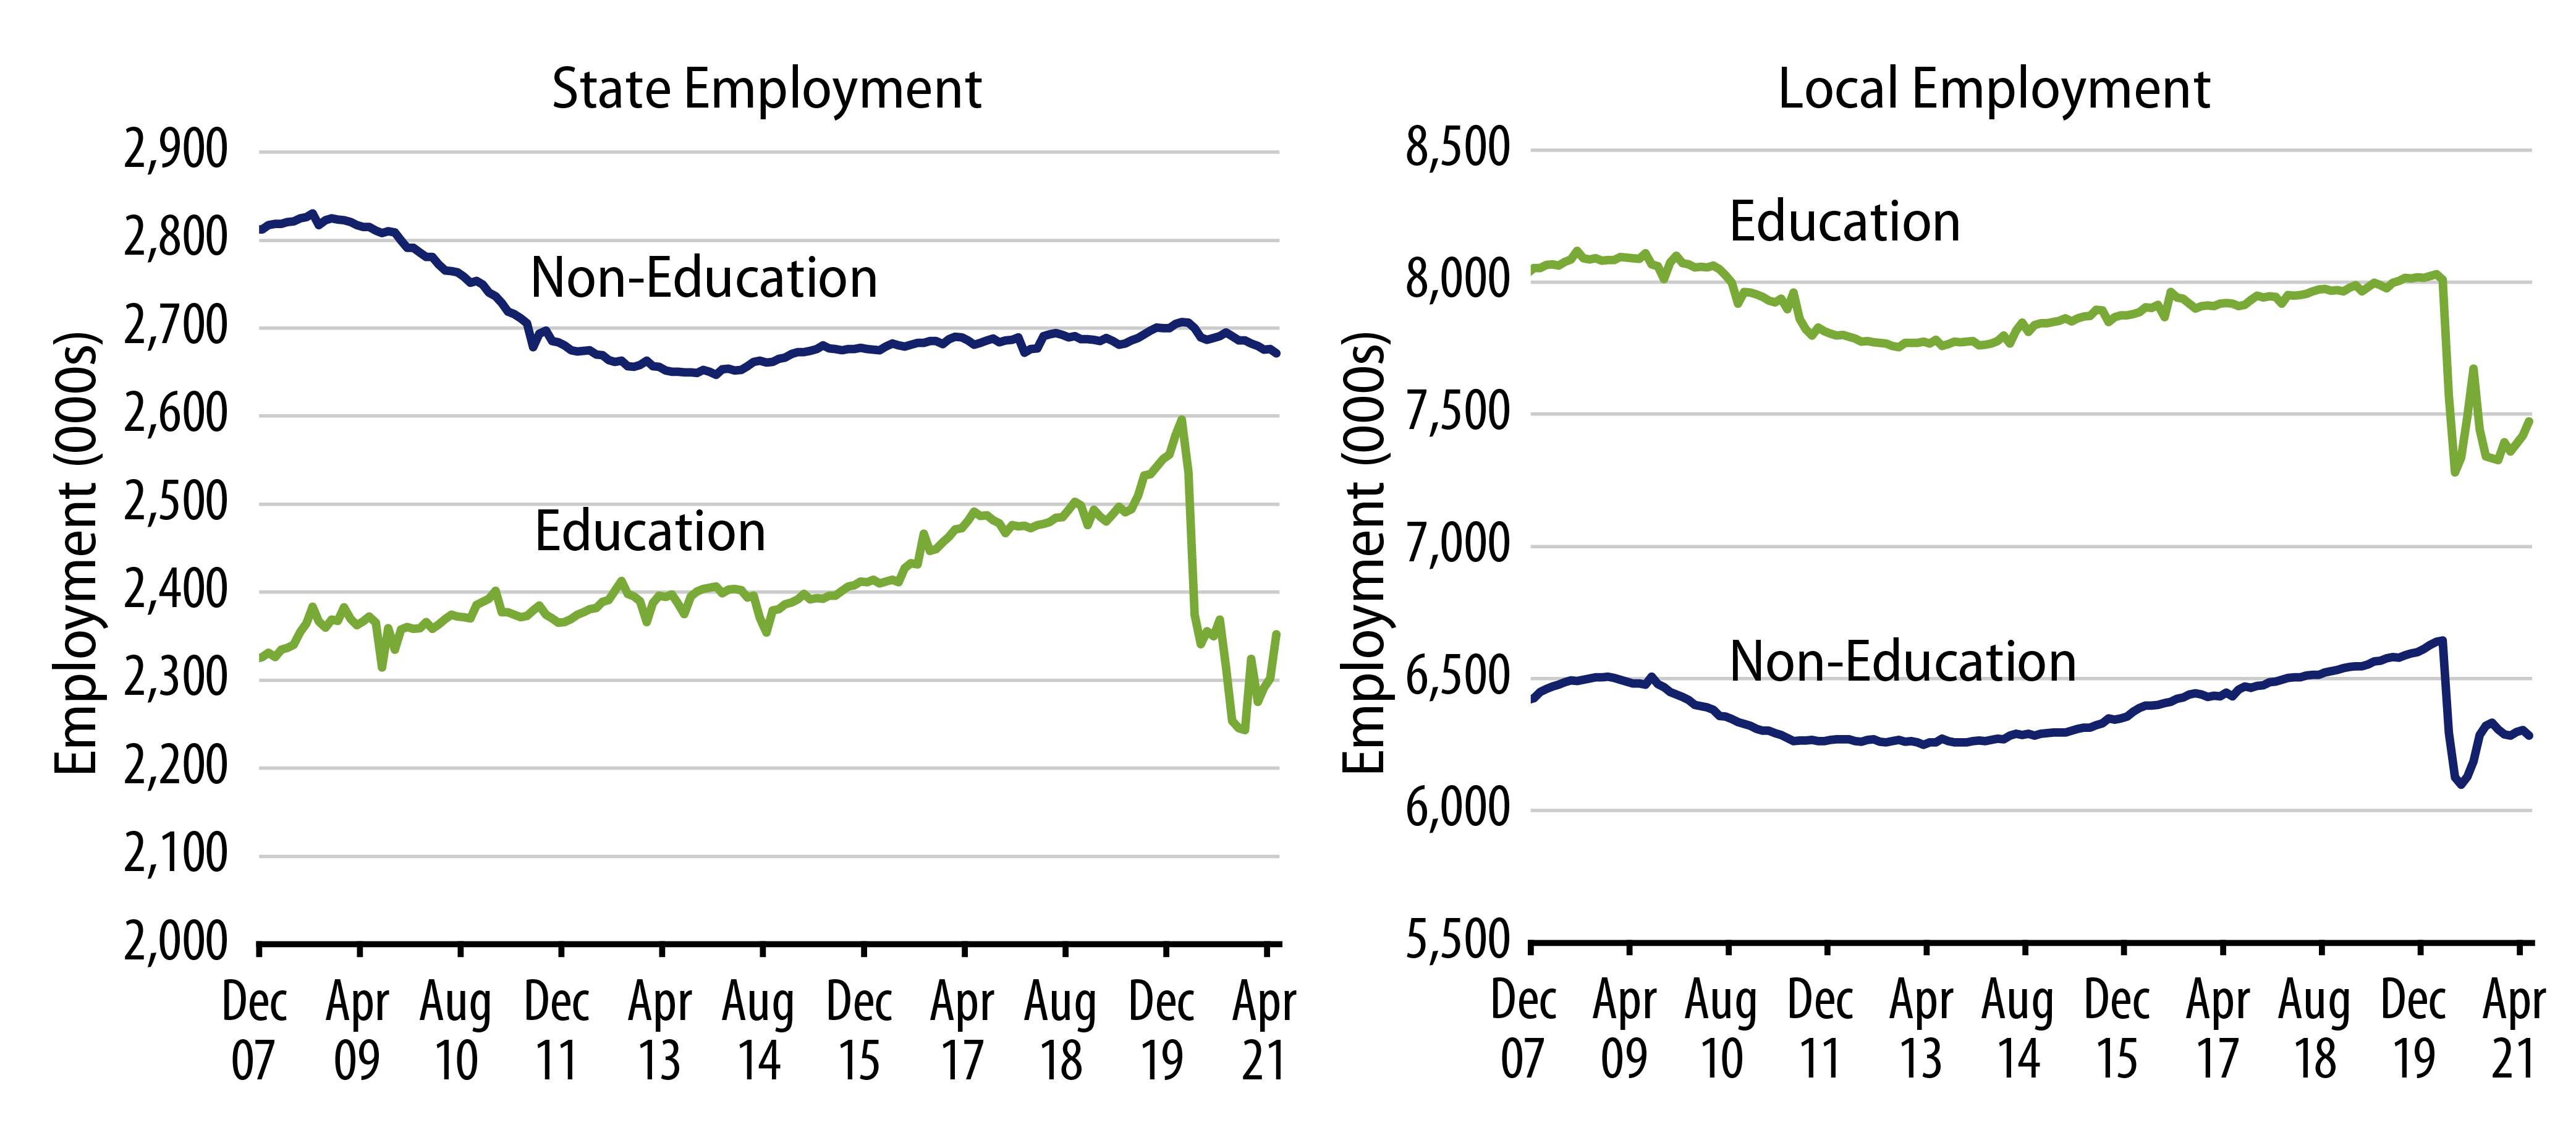 Explore State and Local Employment Trends—Education vs. Non-Education Sectors